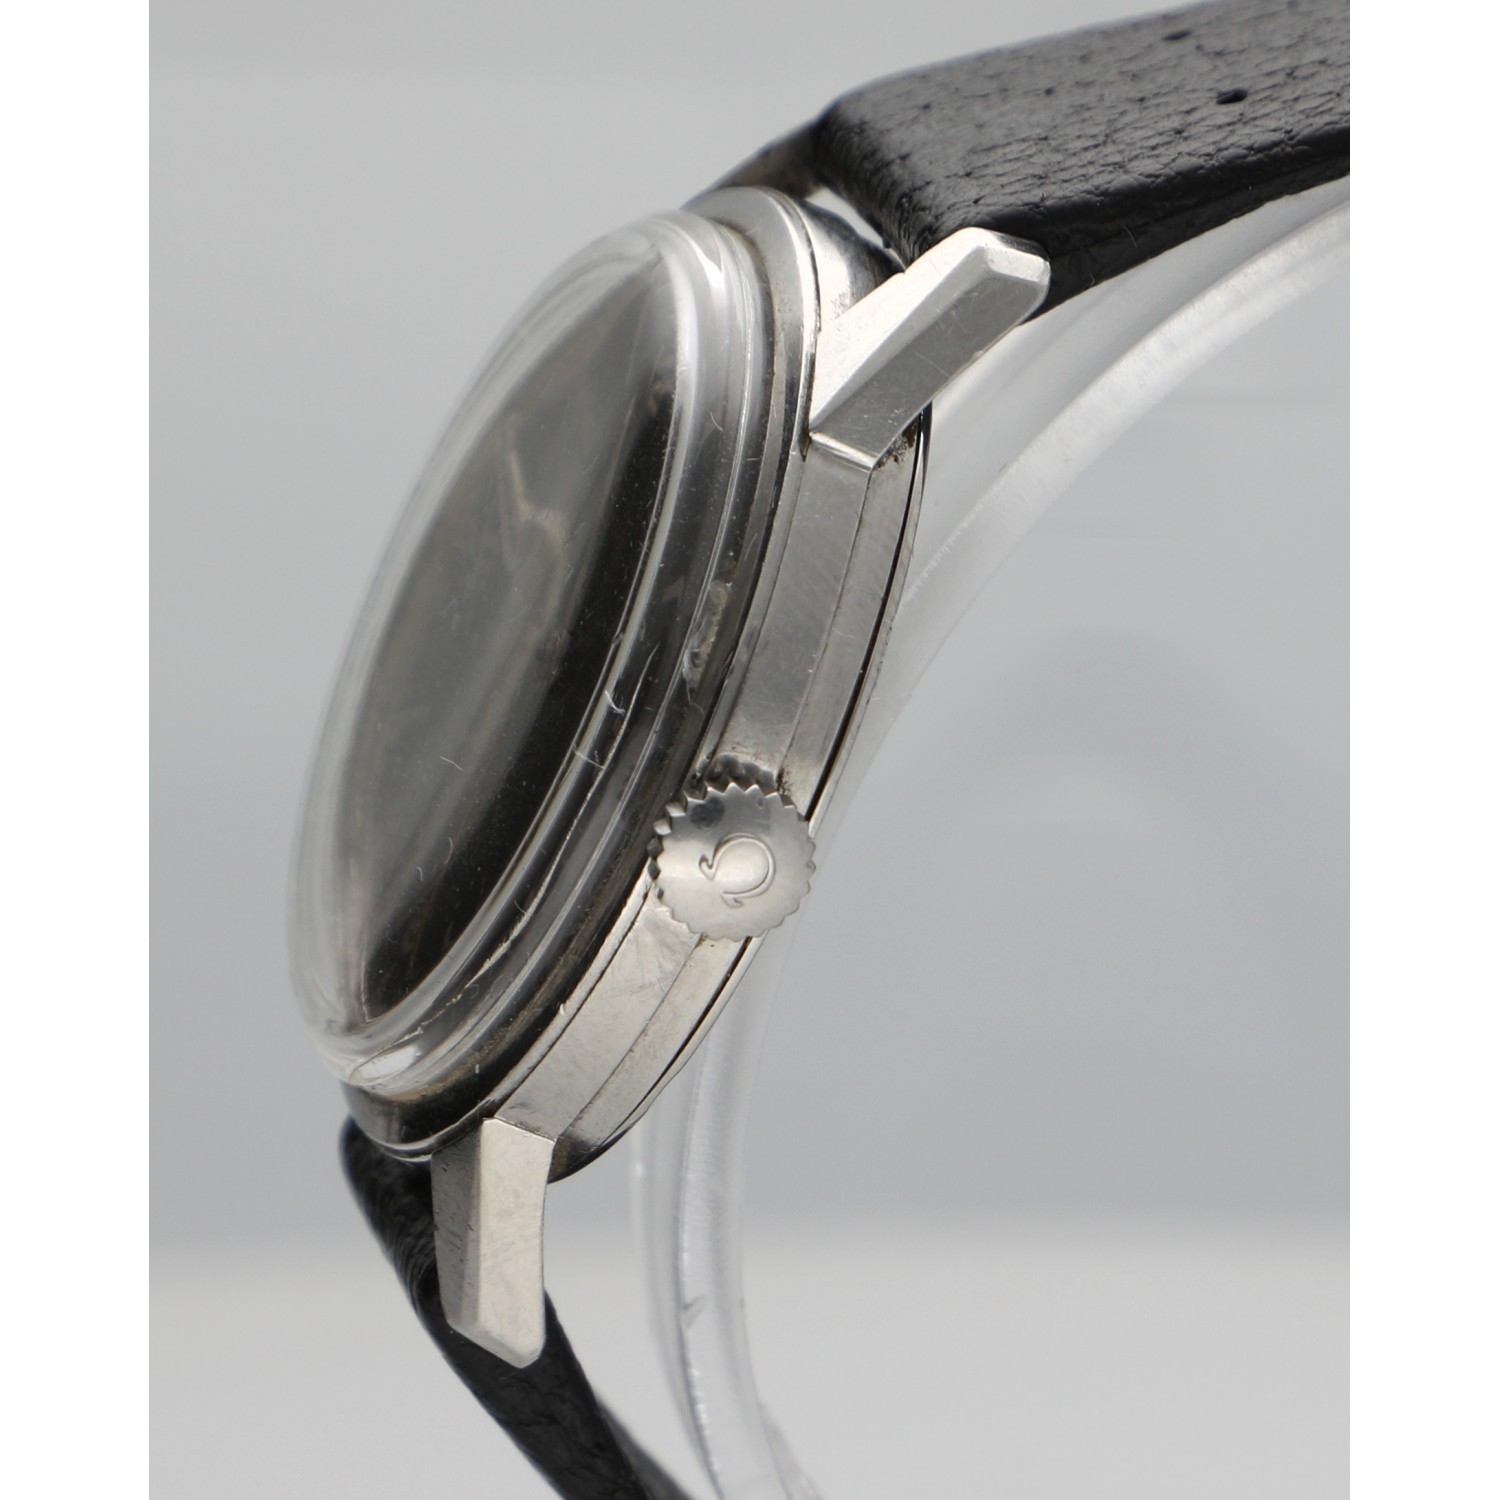 Omega Seamaster 30 stainless steel gentleman's wristwatch, reference no. 135.007-64, serial no. - Image 3 of 7